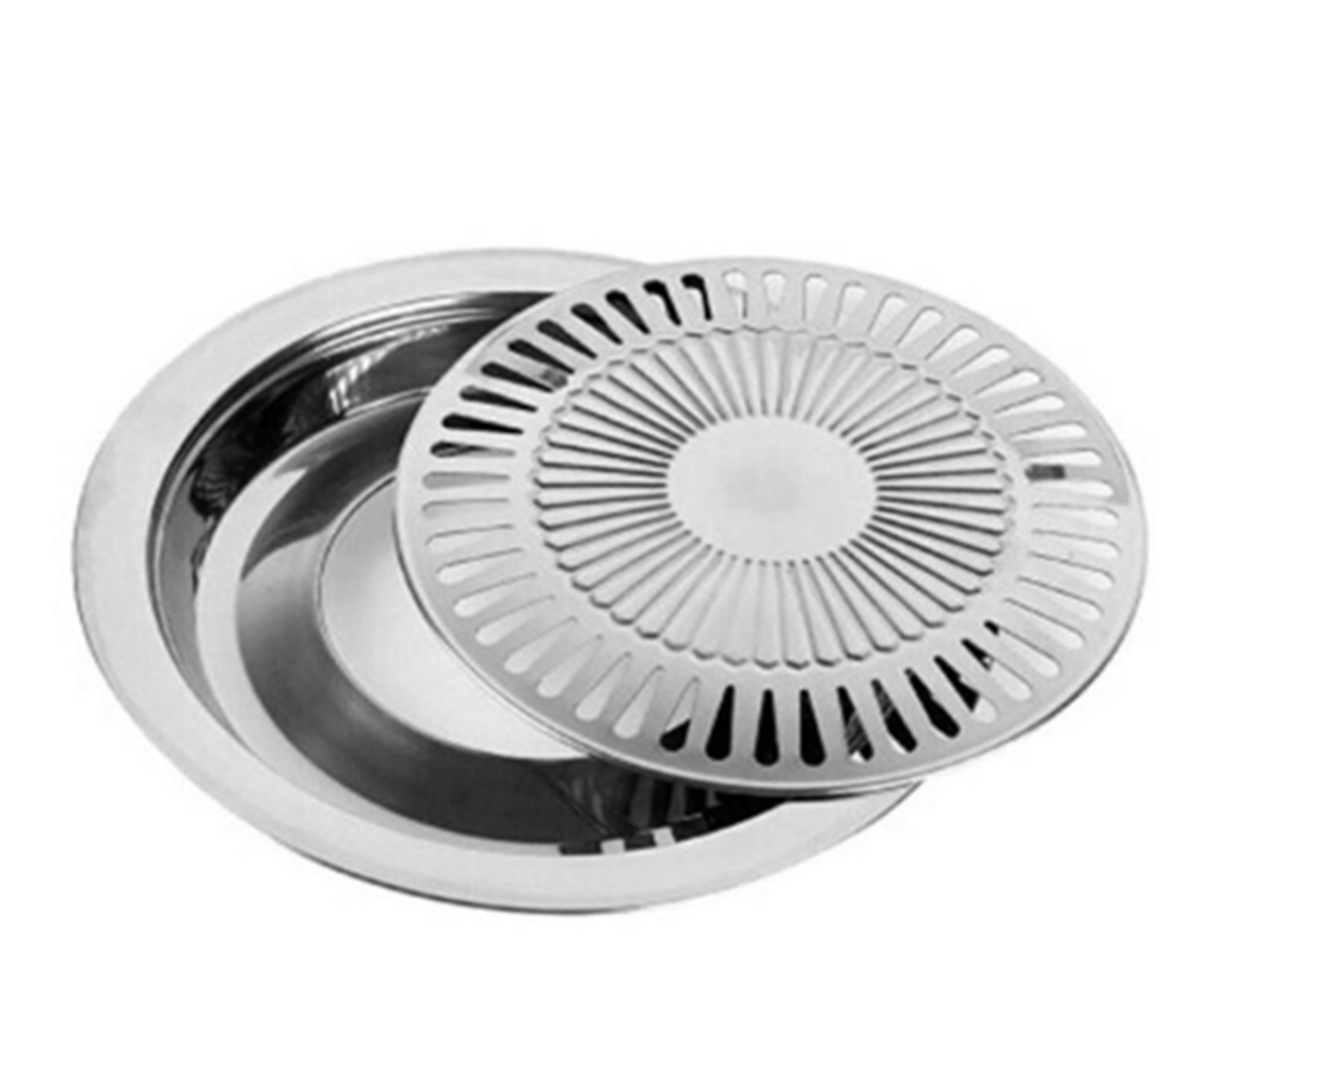 Stainless Steel Korean Barbecue Tray Round Household Barbecue Tray Non-stick Grill Pan